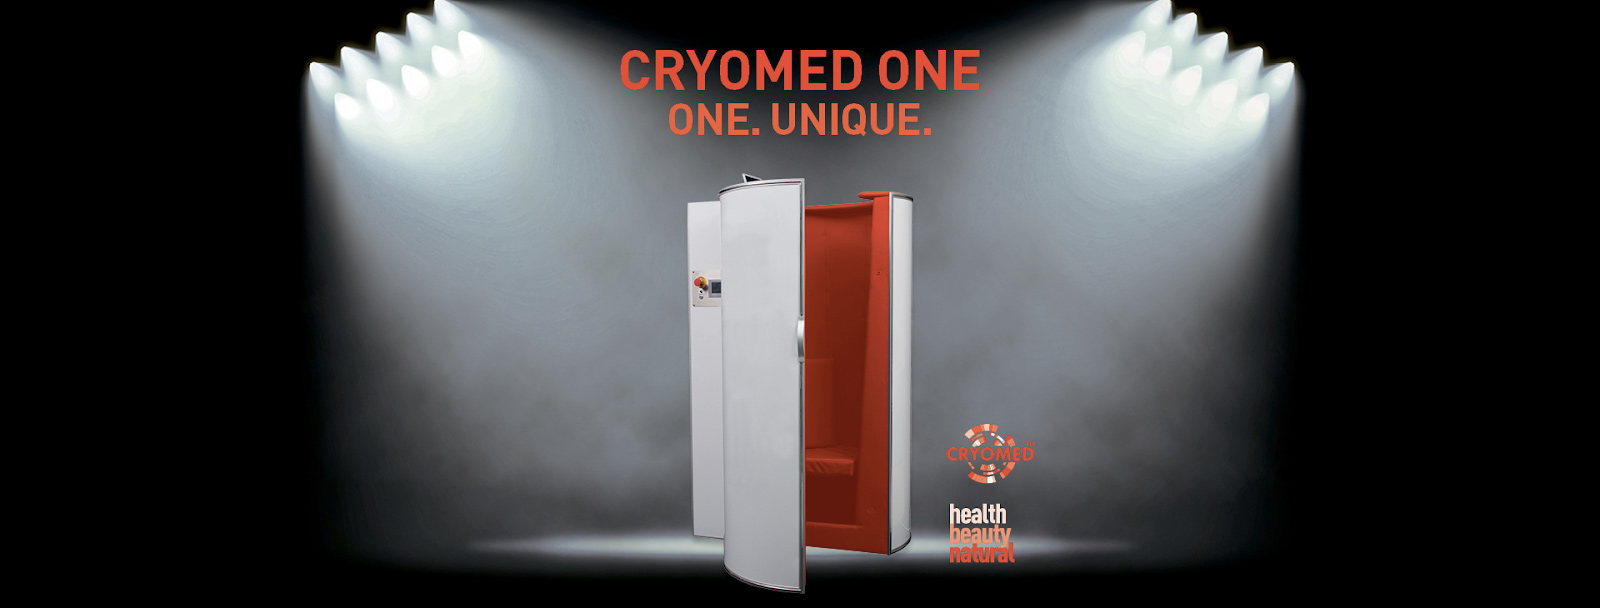 Cryomed One – the first choice in whole body cryotherapy equipment - photo